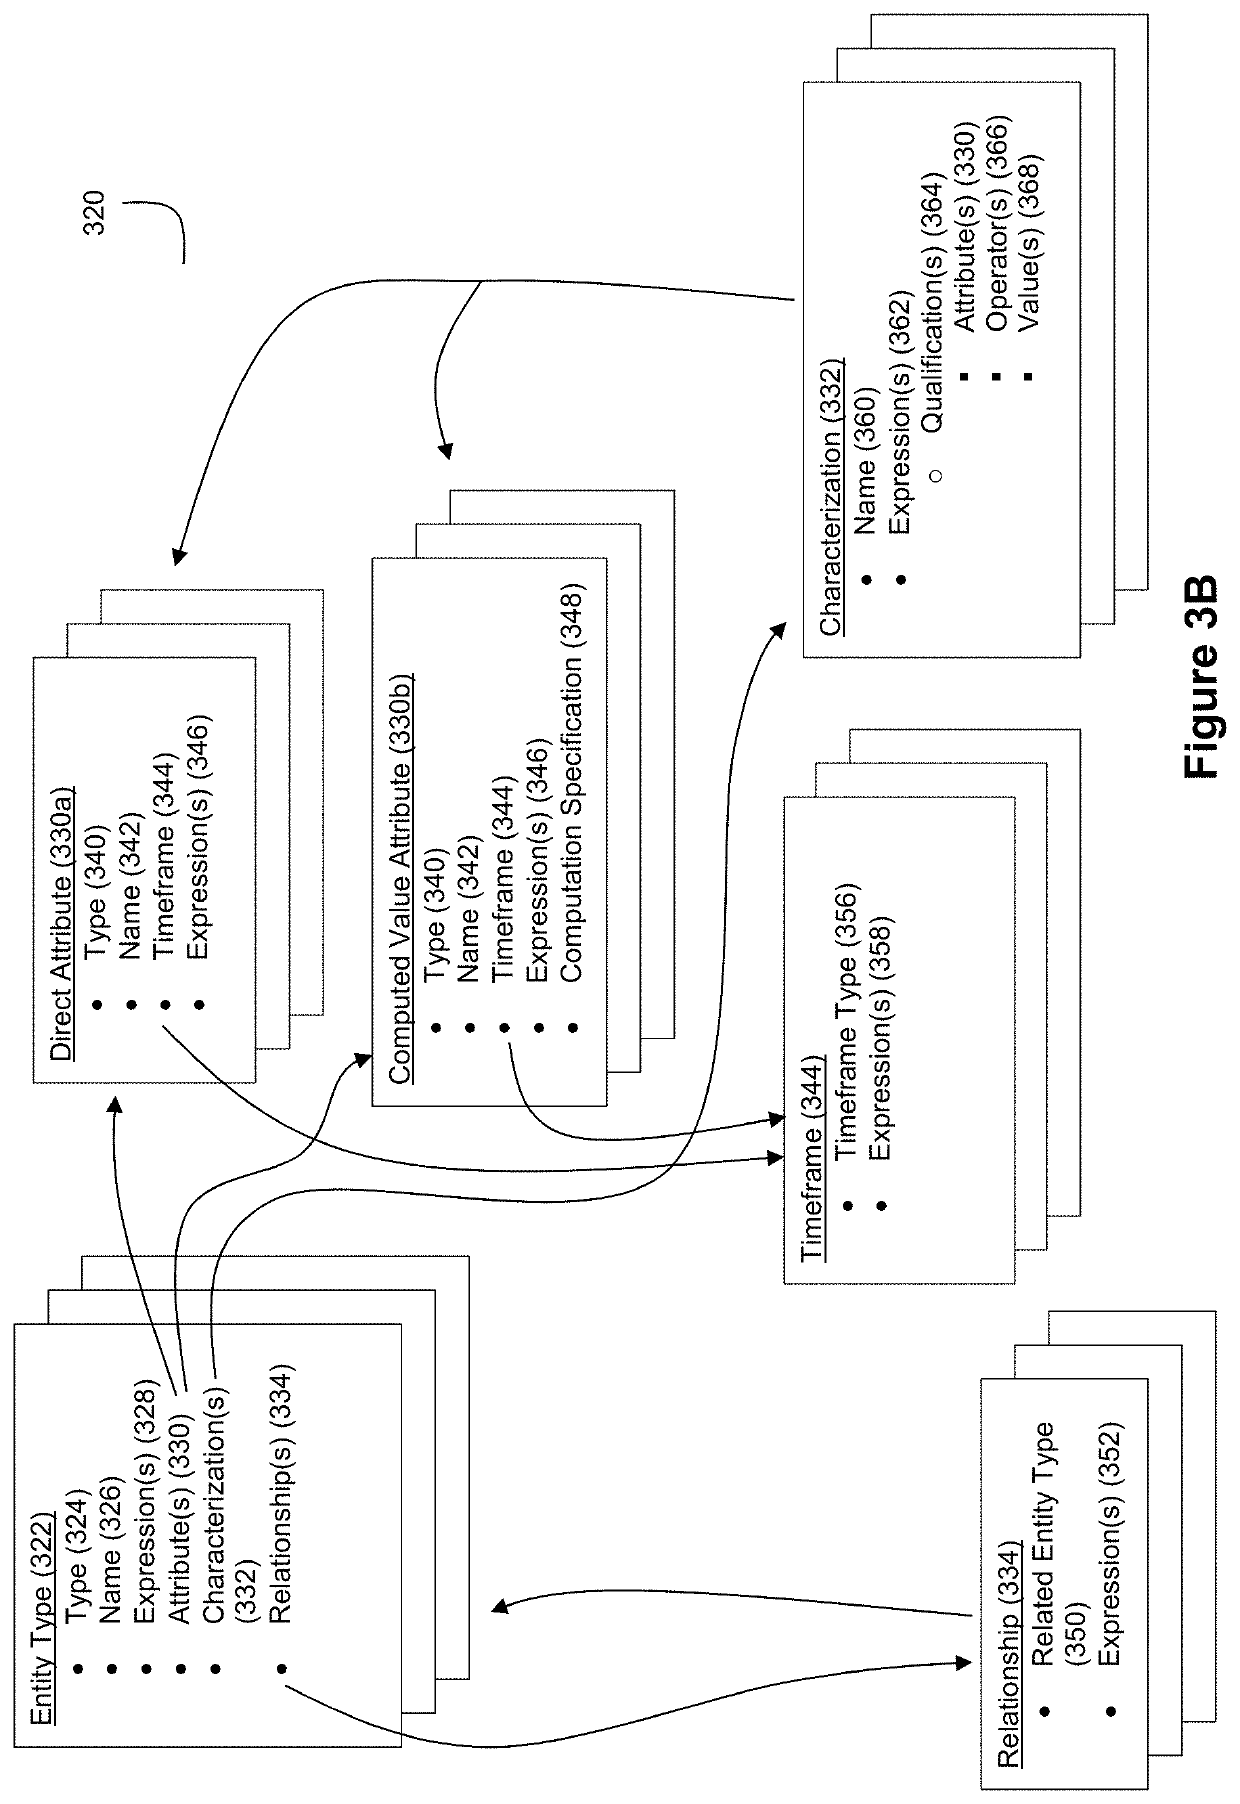 Applied artificial intelligence technology for determining and mapping data requirements for narrative stories to support natural language generation (NLG) using composable communication goals